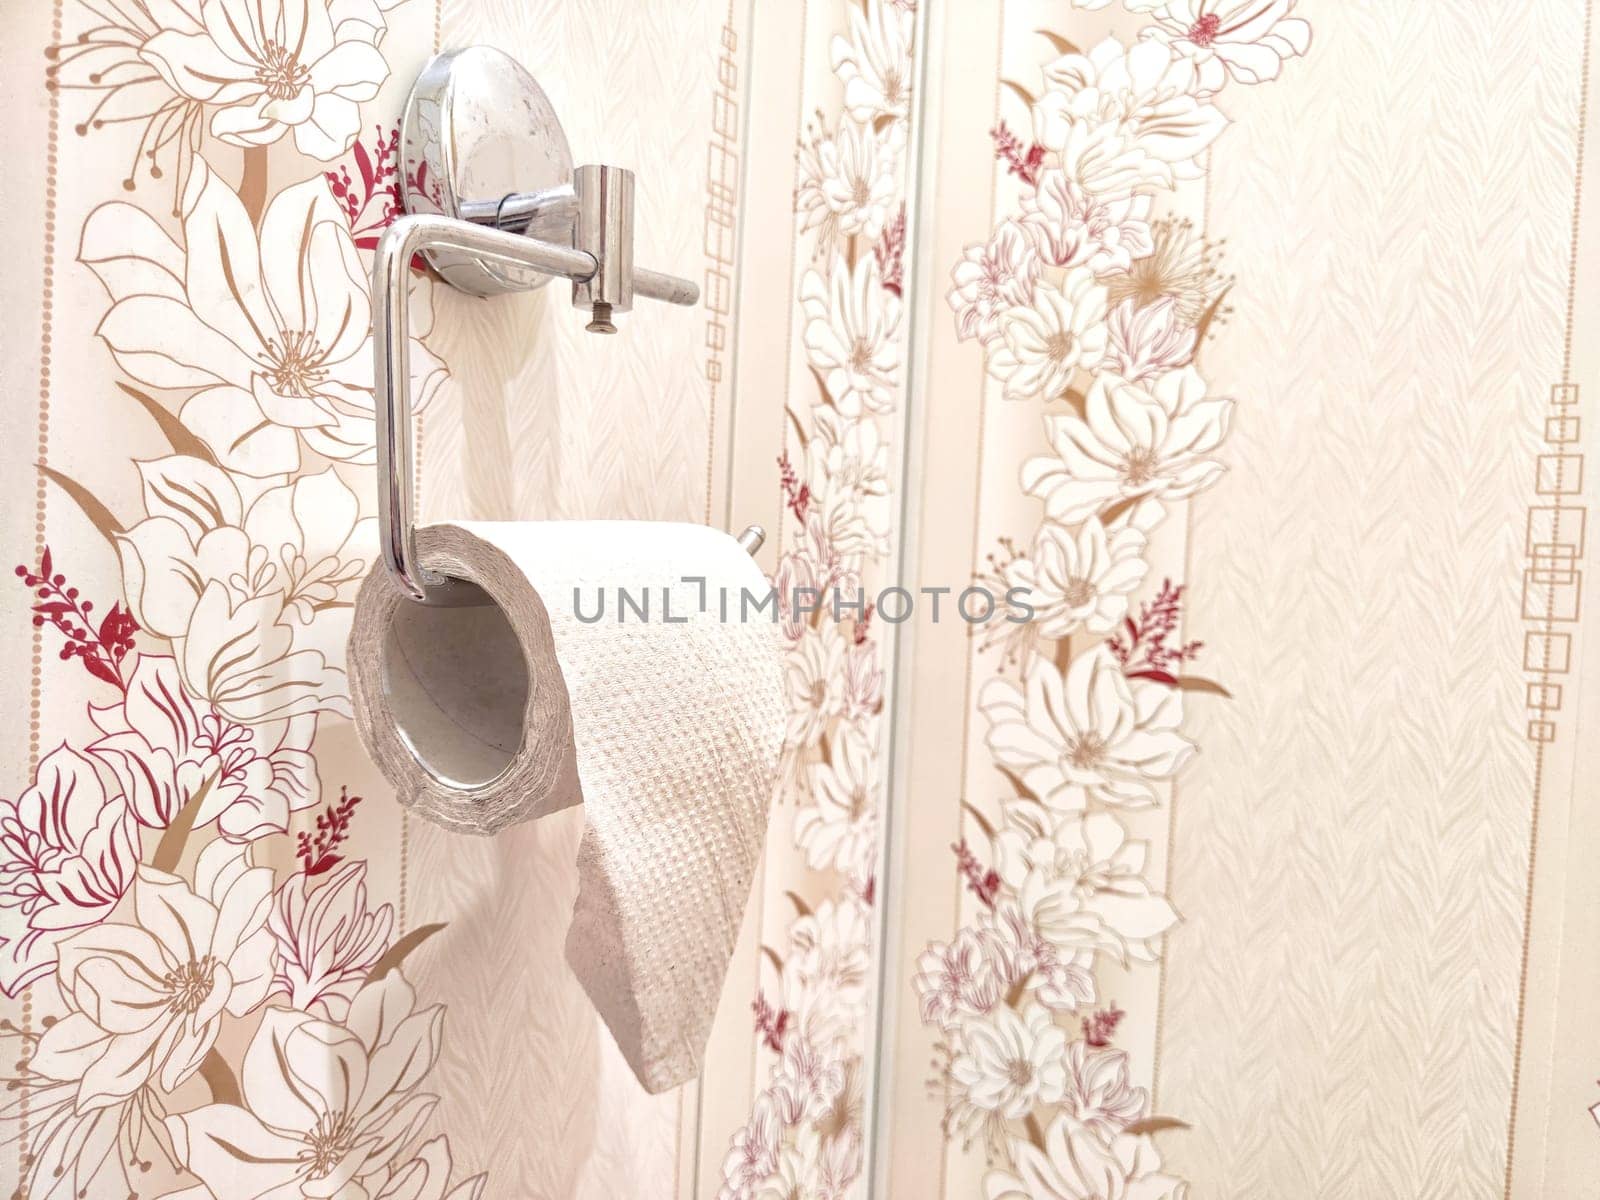 Toilet paper on a chrome holder against decorative floral wallpaper. Restroom Toilet Paper Holder With Floral Wallpaper by keleny